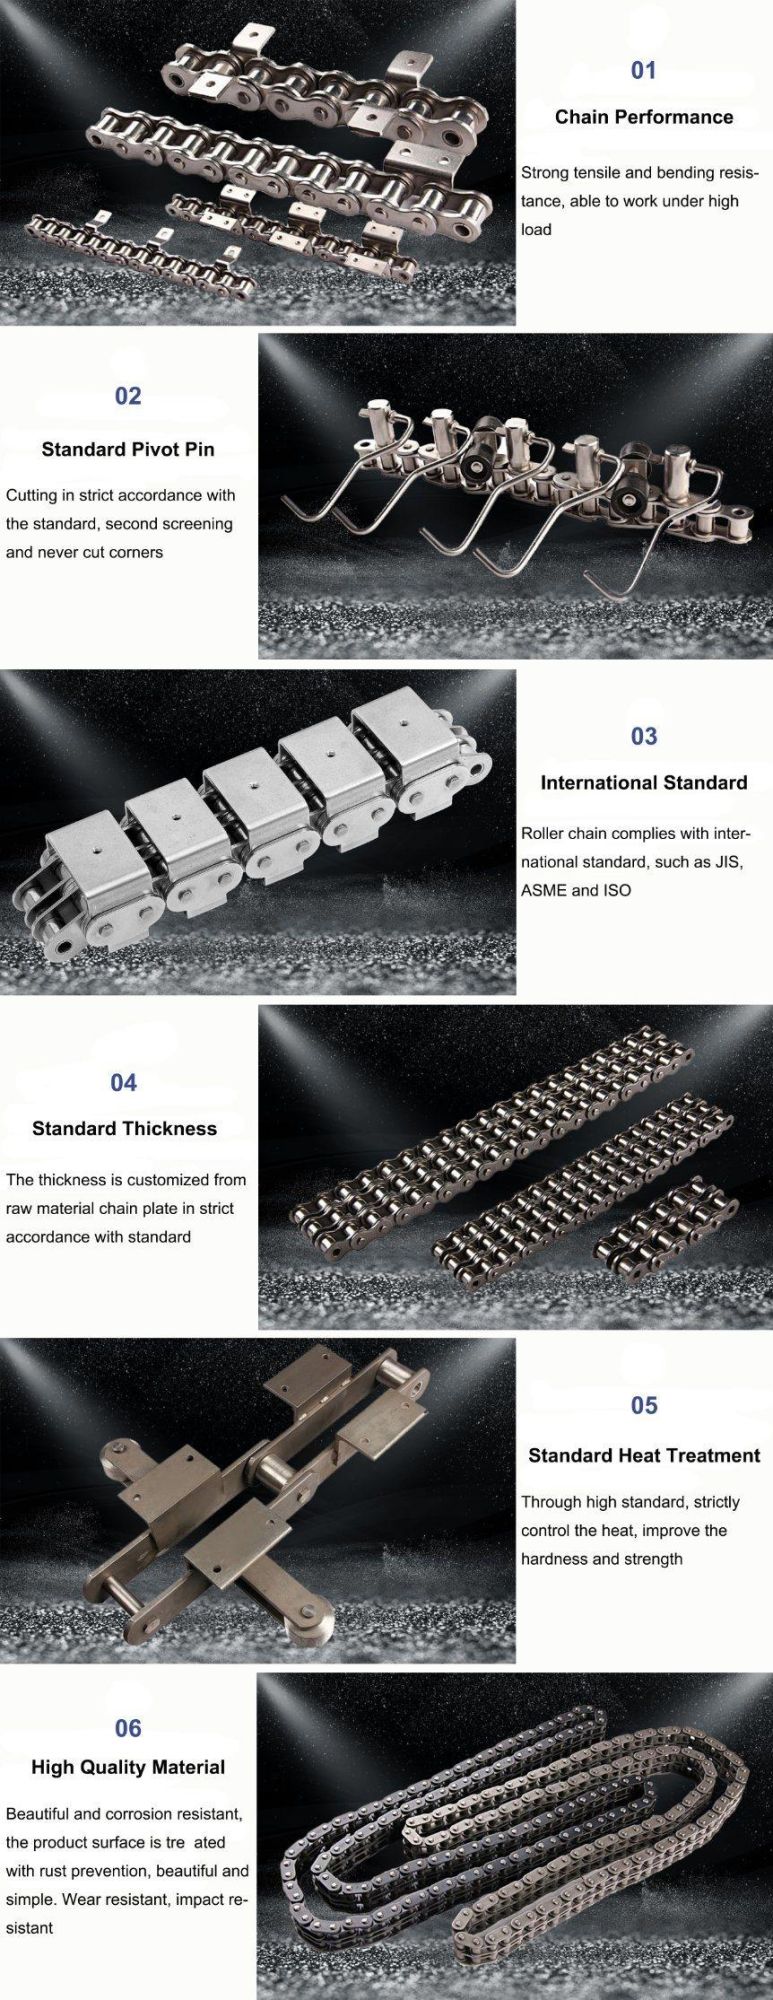 ANSI DIN Standard Pitch Industrial Heavy Duty Stainless Steel Cathode Copper Conveyor Chain